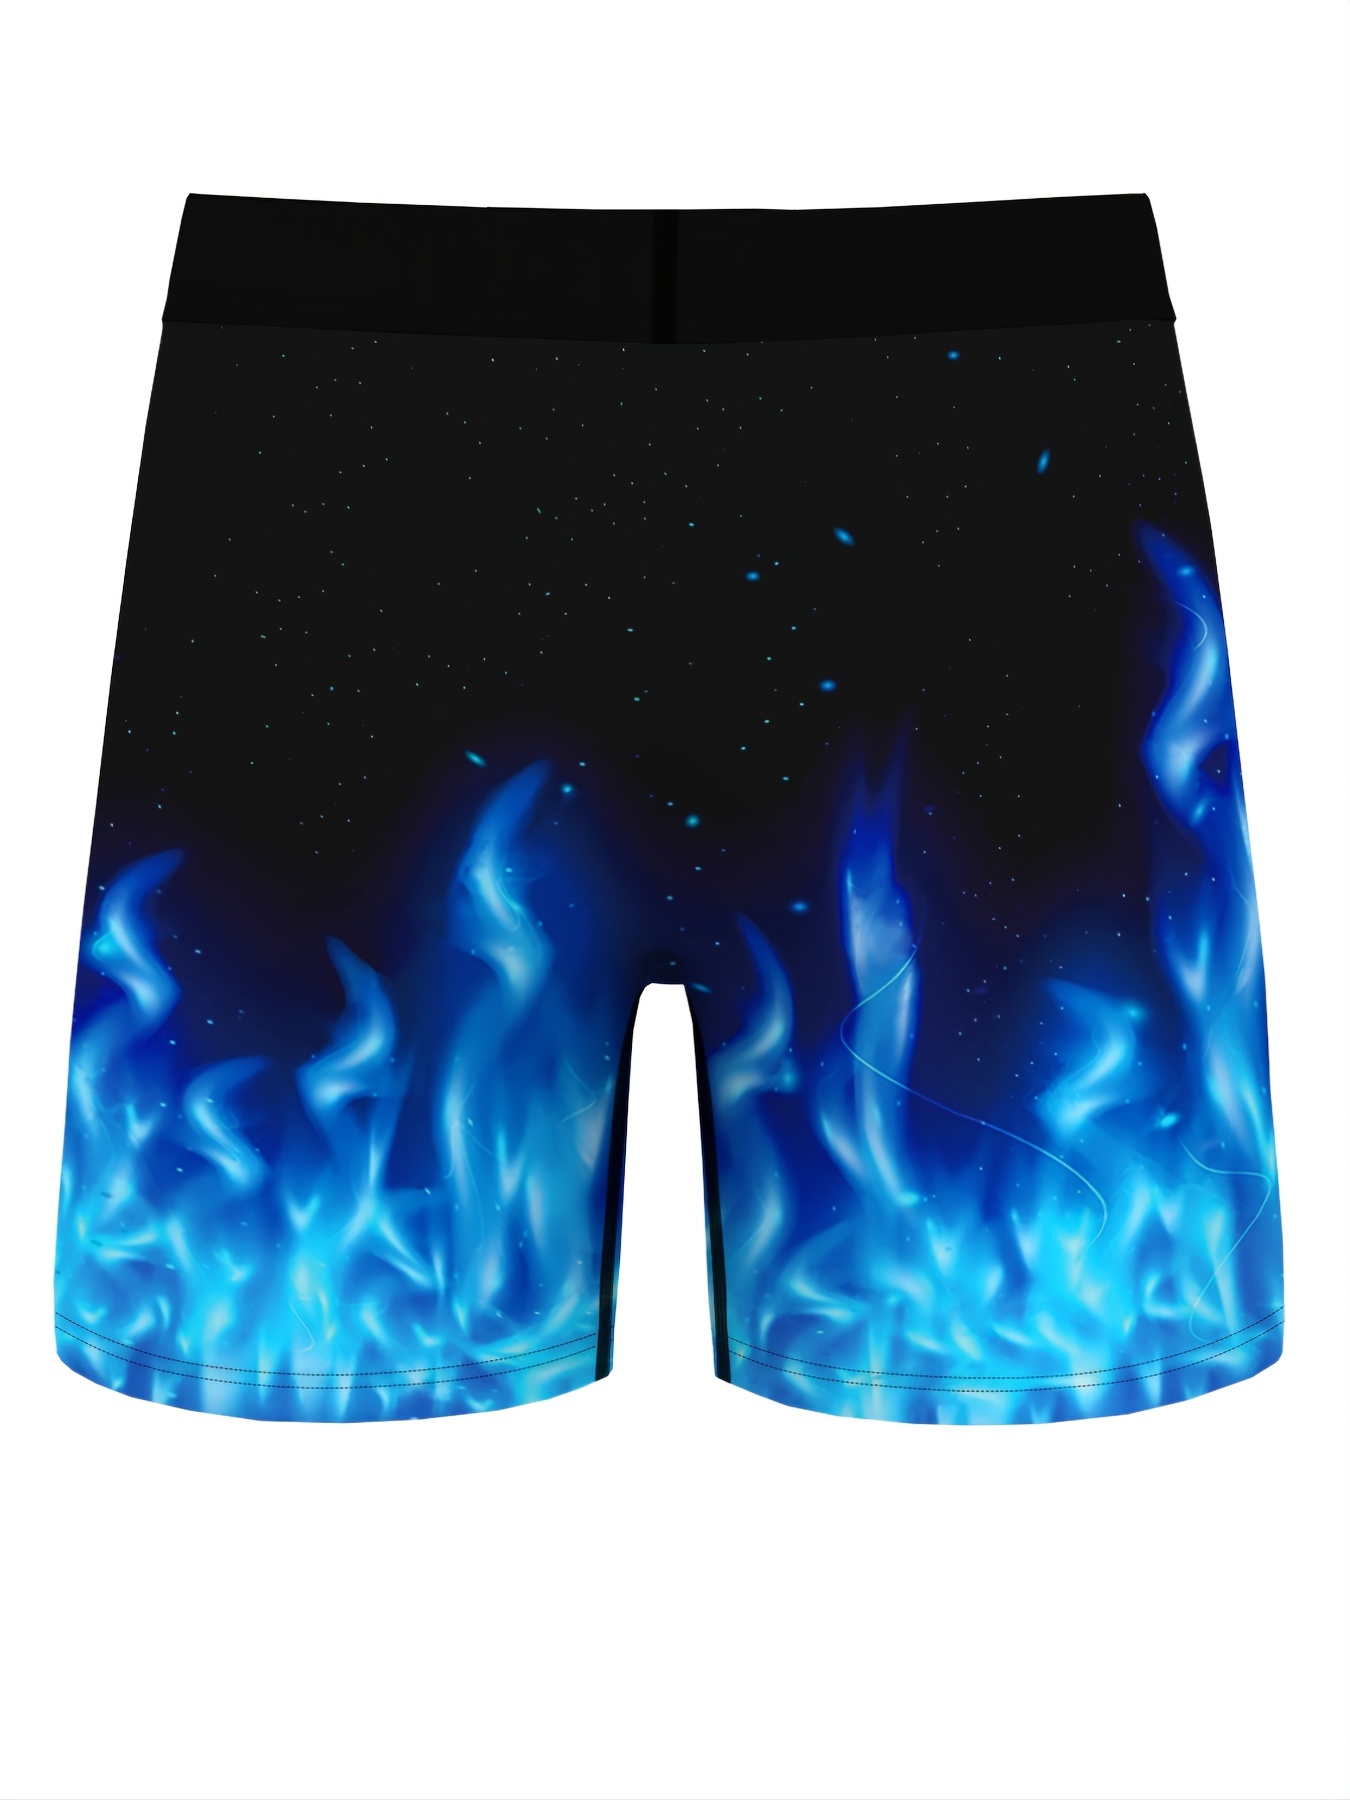 3D Wolf Printed Mens Underwear Underpants Boxers Briefs Comfortable Soft  Shorts